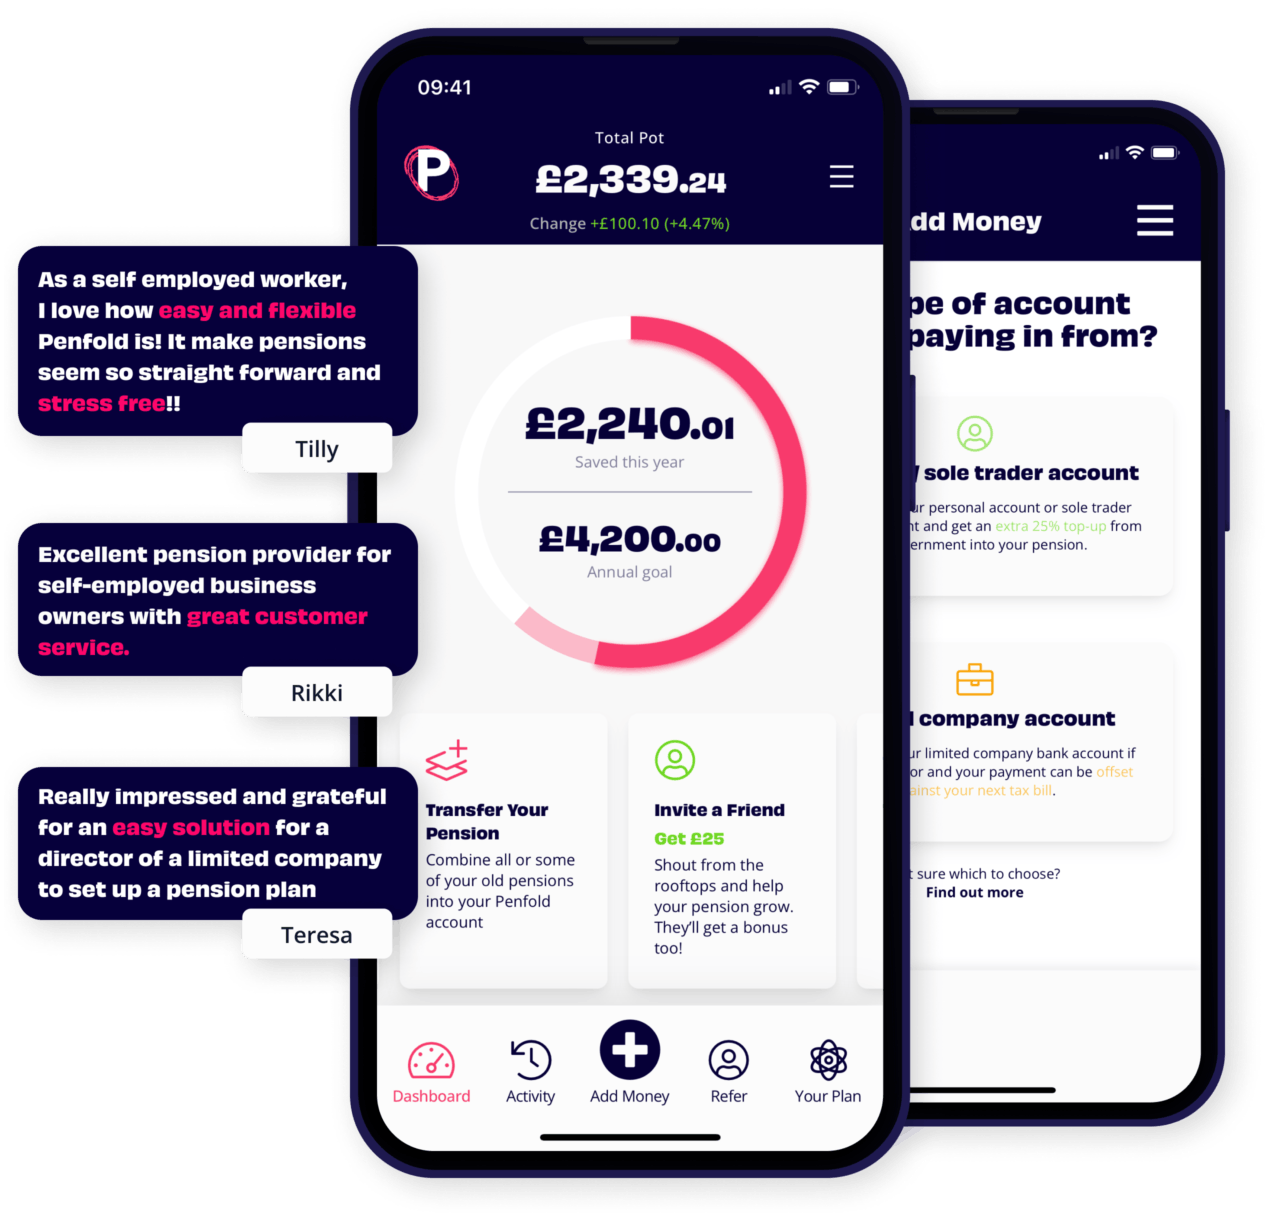 Penfold app showing pension dashboard and self employed pension customer service reviews